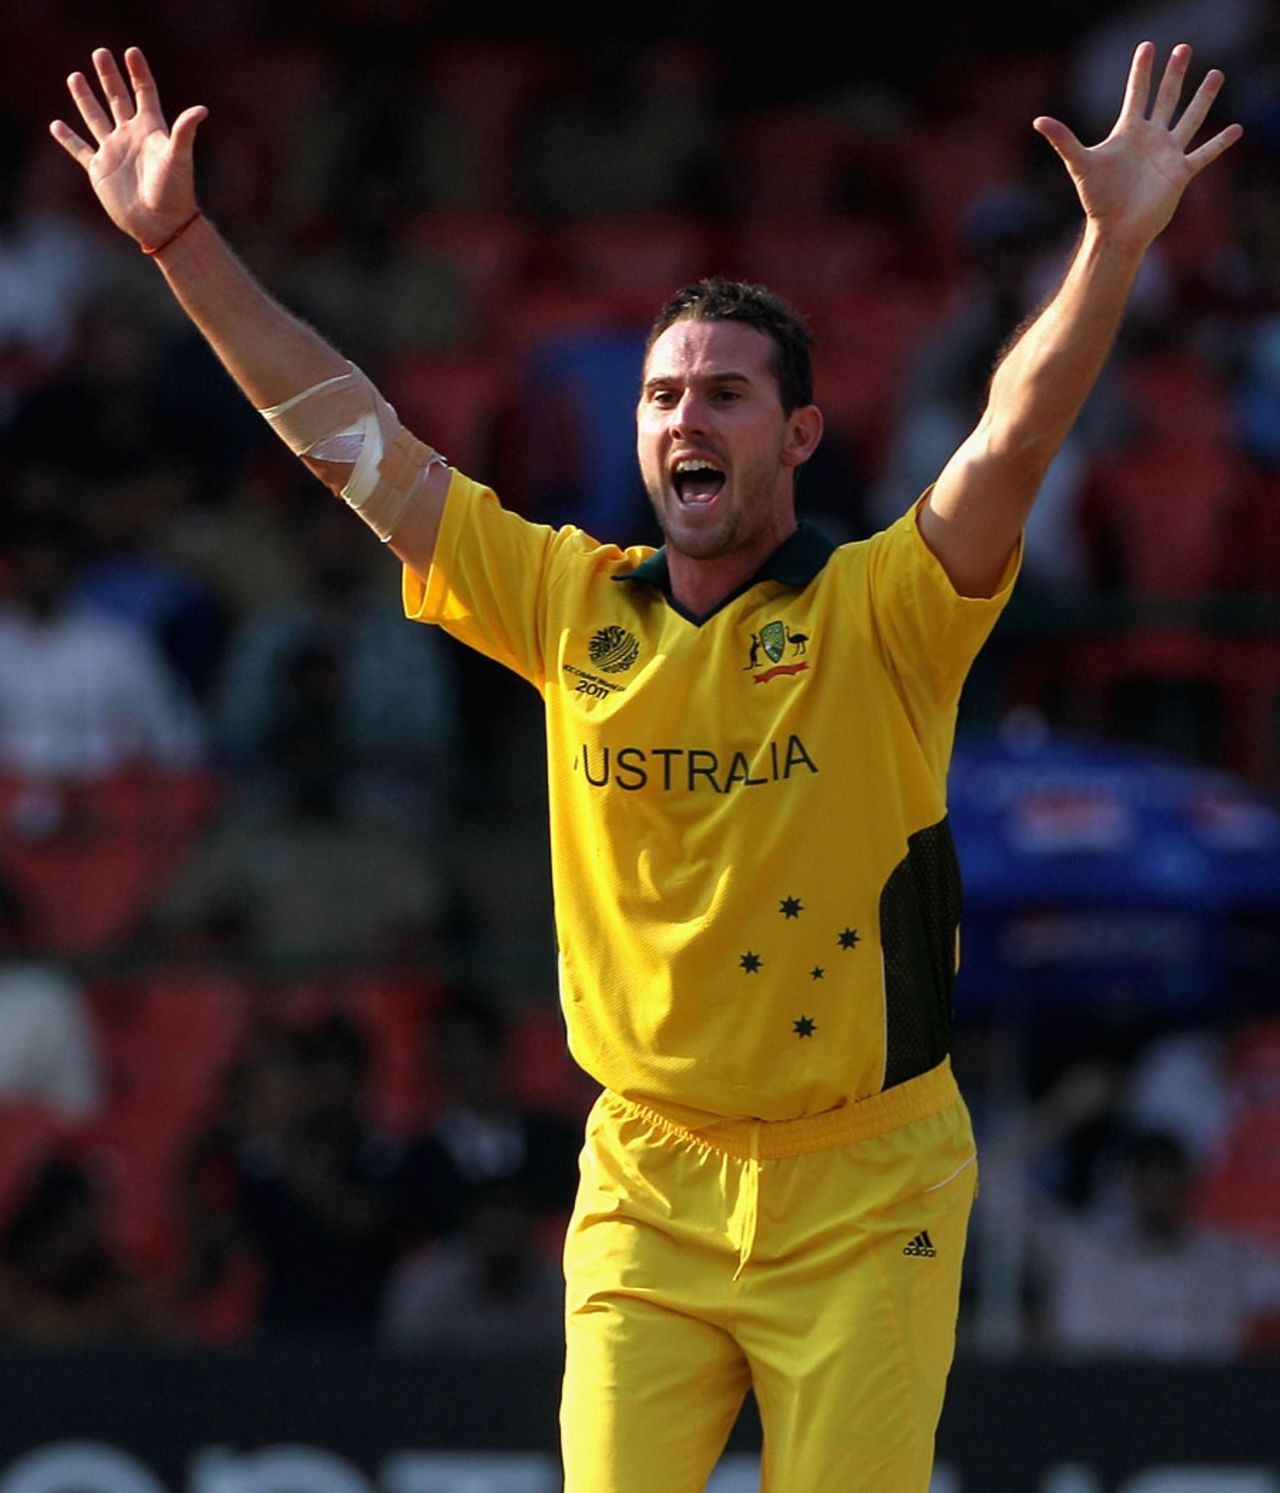 Shaun Tait appeals against Canada, Australia v Canada, Group A, World Cup, Bangalore, March 16, 2011